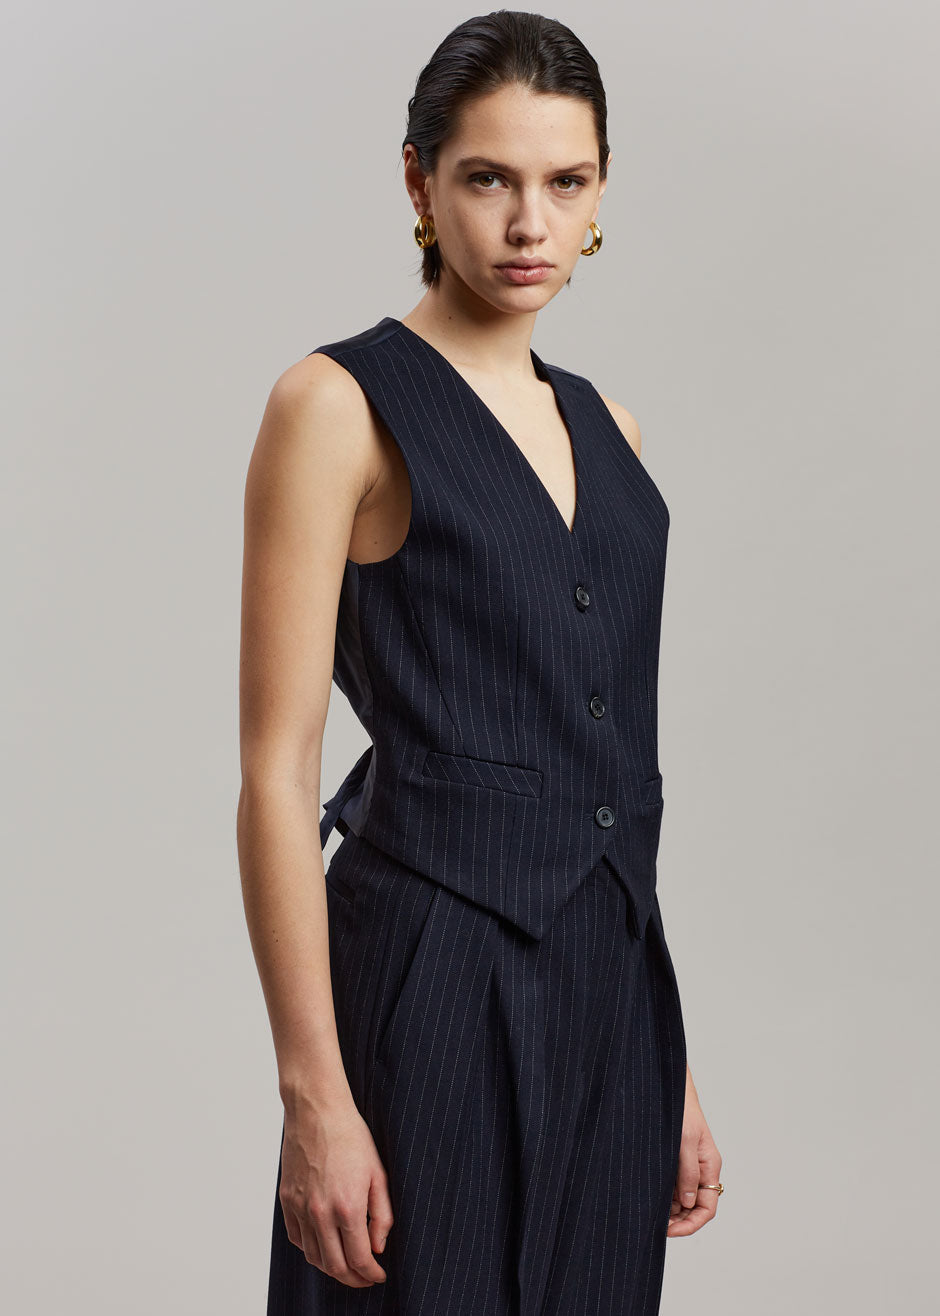 Tansy Tailored Vest - Navy Pinstripe - 4